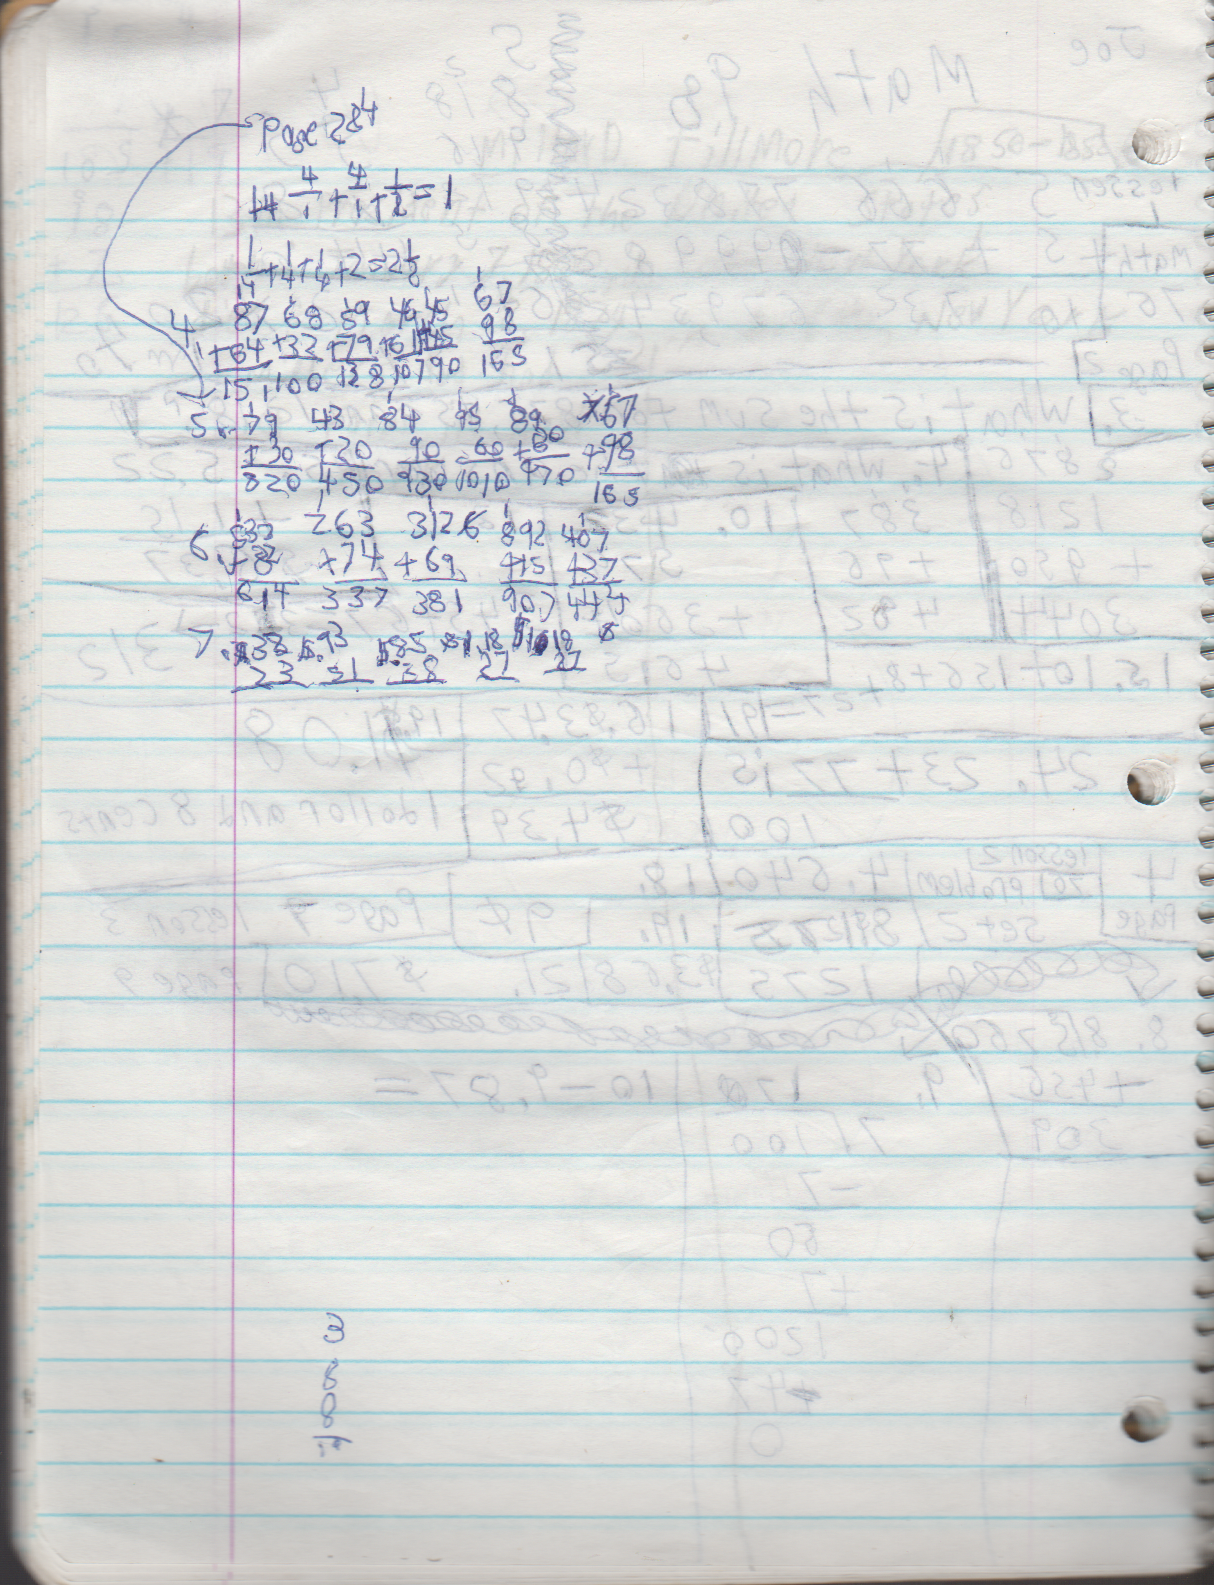 1996-08-18 - Saturday - 11 yr old Joey Arnold's School Book, dates through to 1998 apx, mostly 96, Writings, Drawings, Etc-034.png